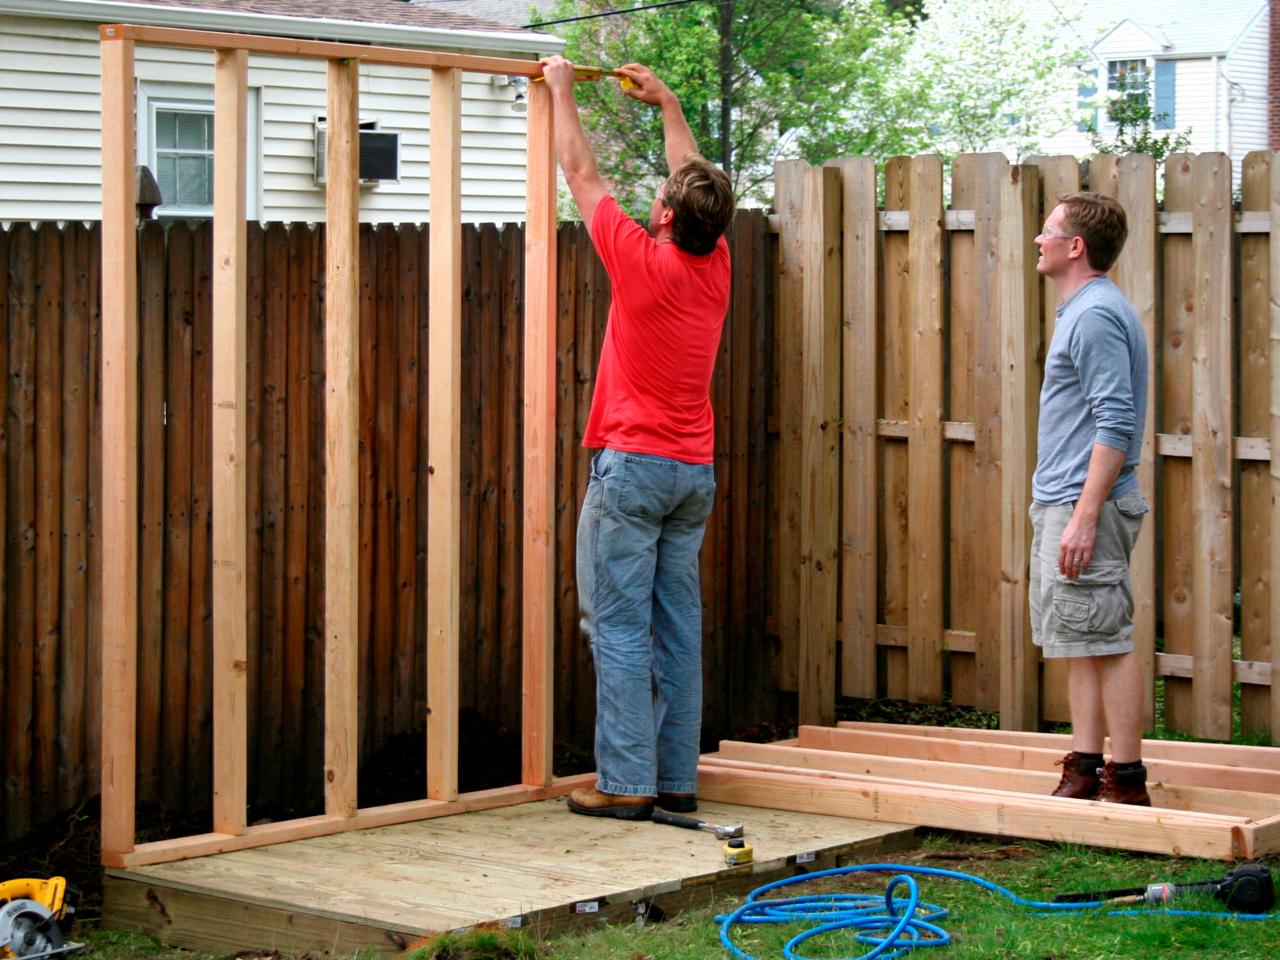 How to Build a Storage Shed for Garden Tools | HGTV